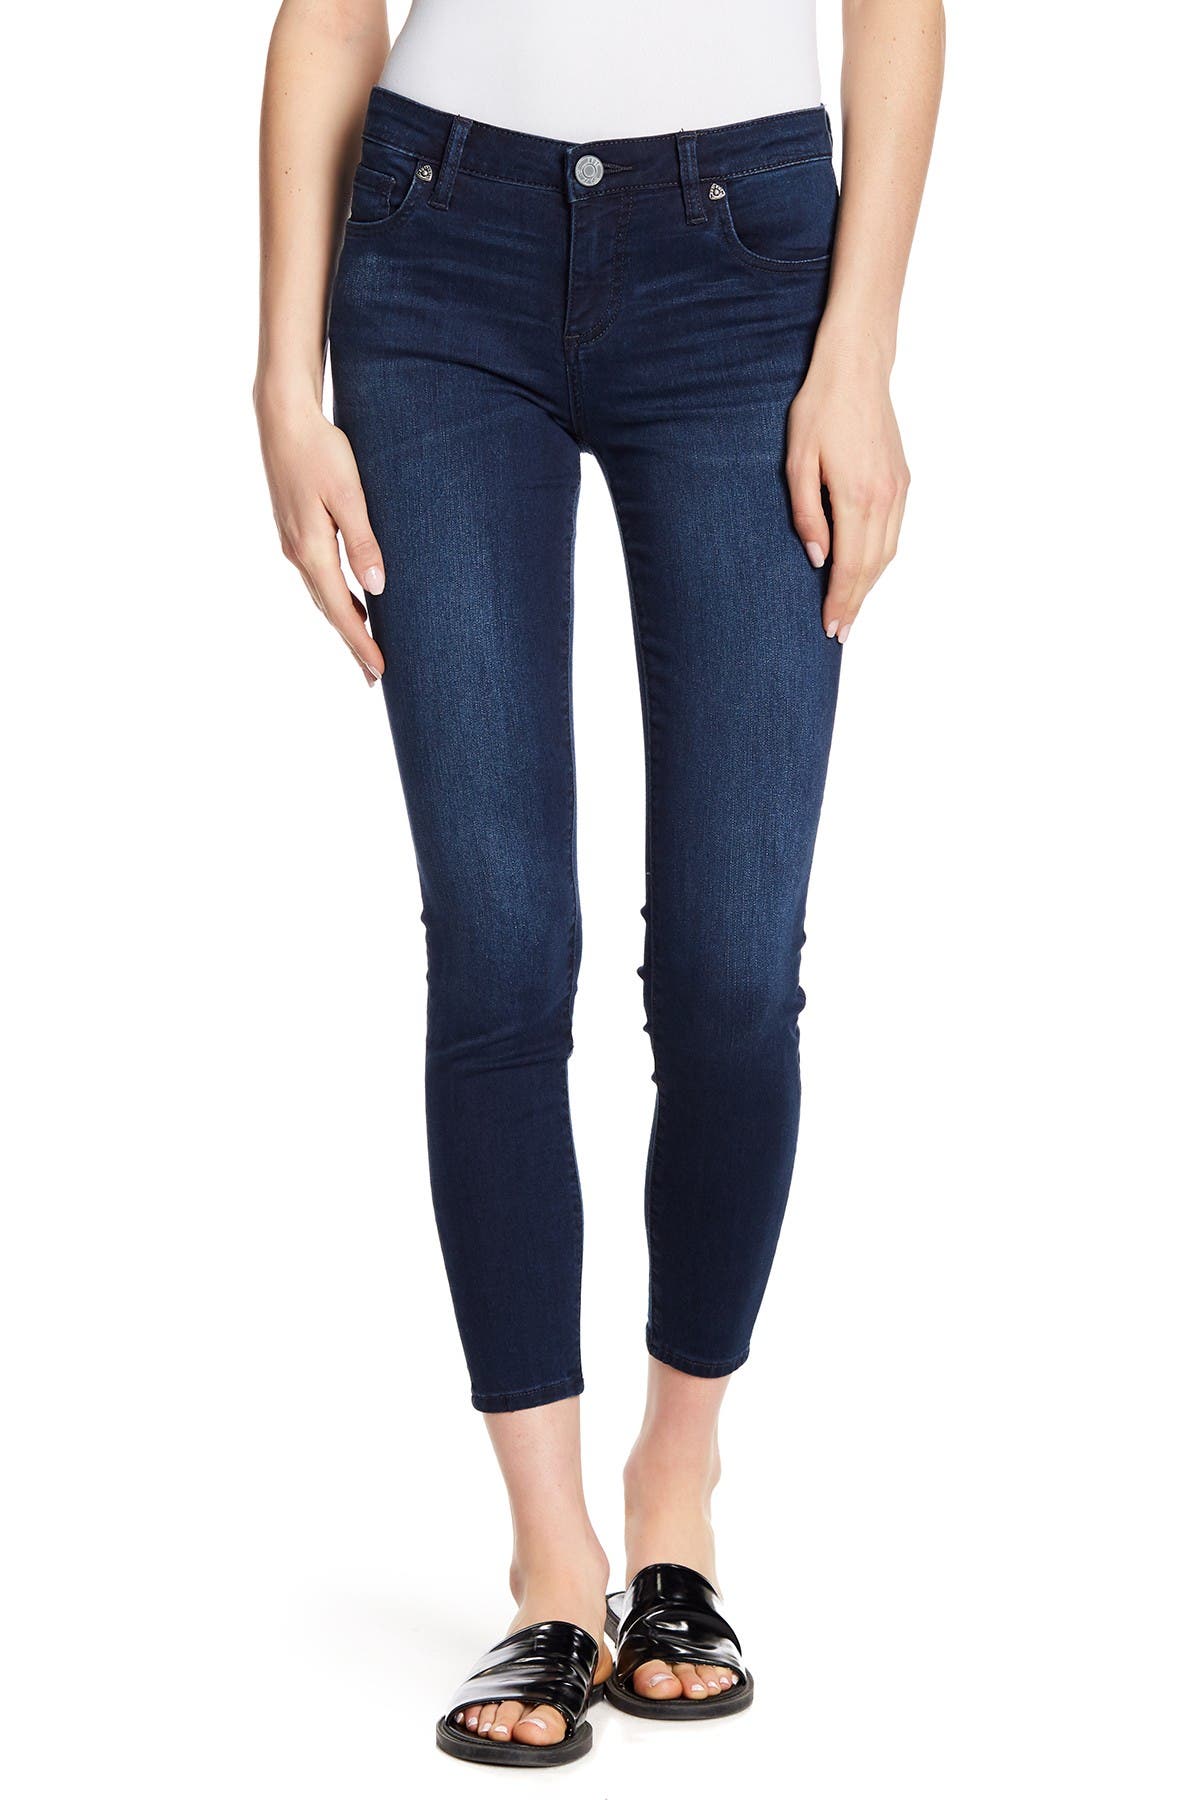 free people flare jeans sale